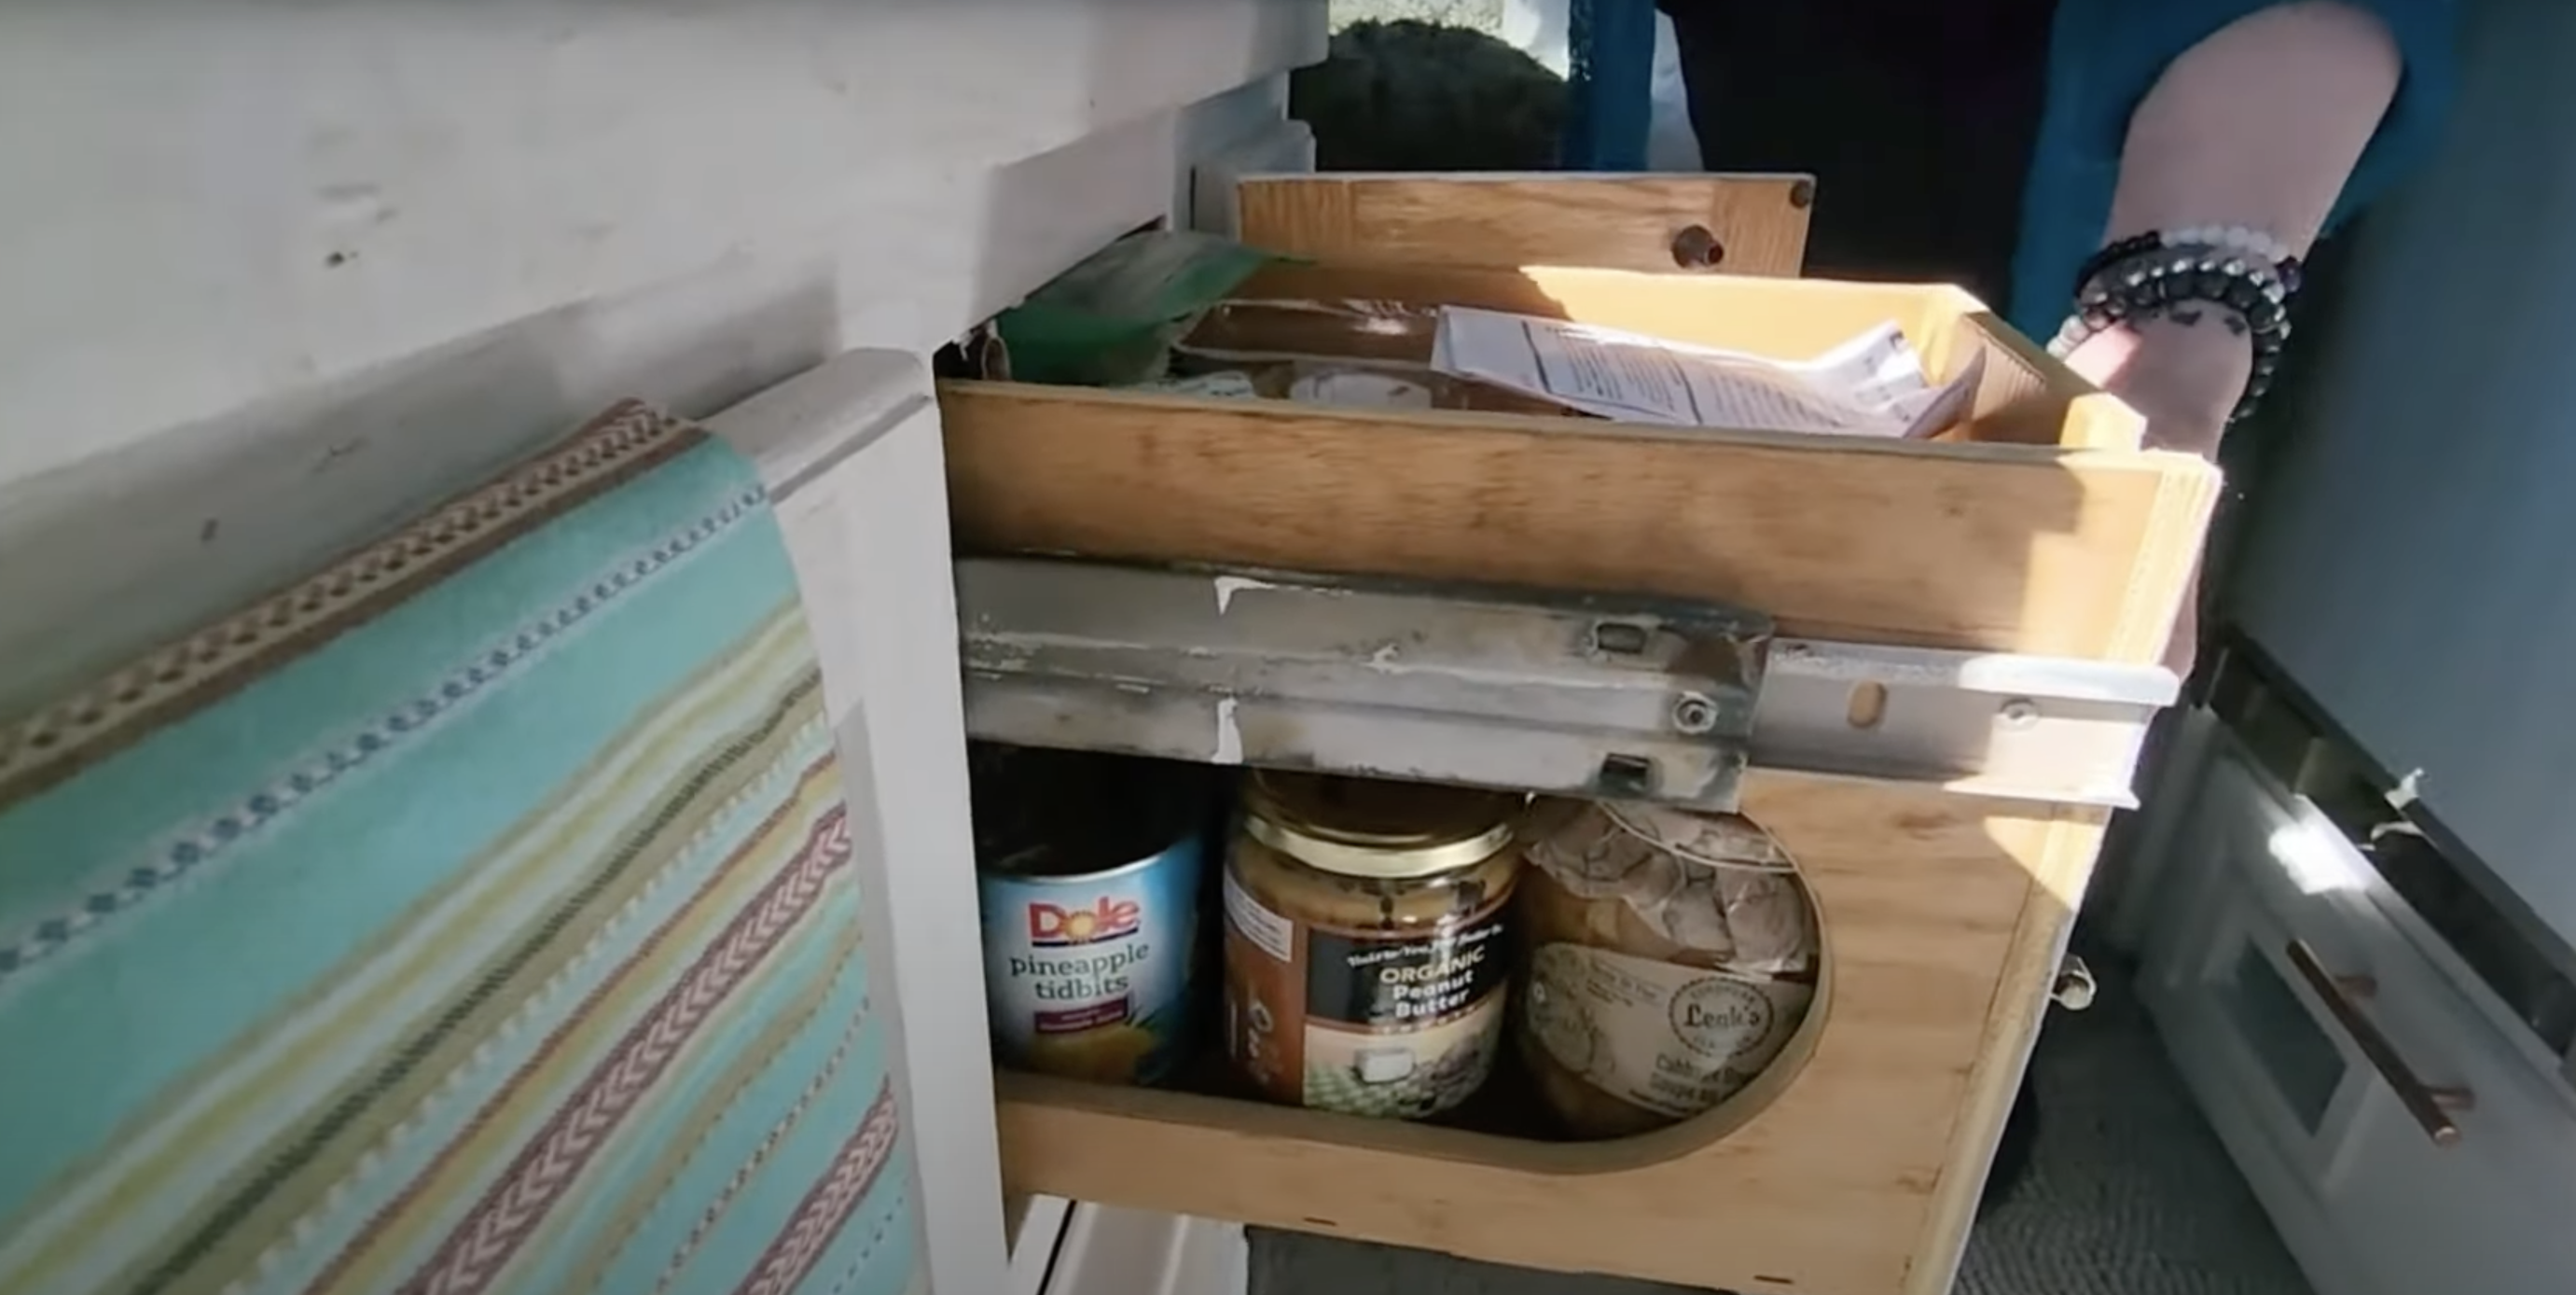 There is a handy little pantry with a junk drawer on top